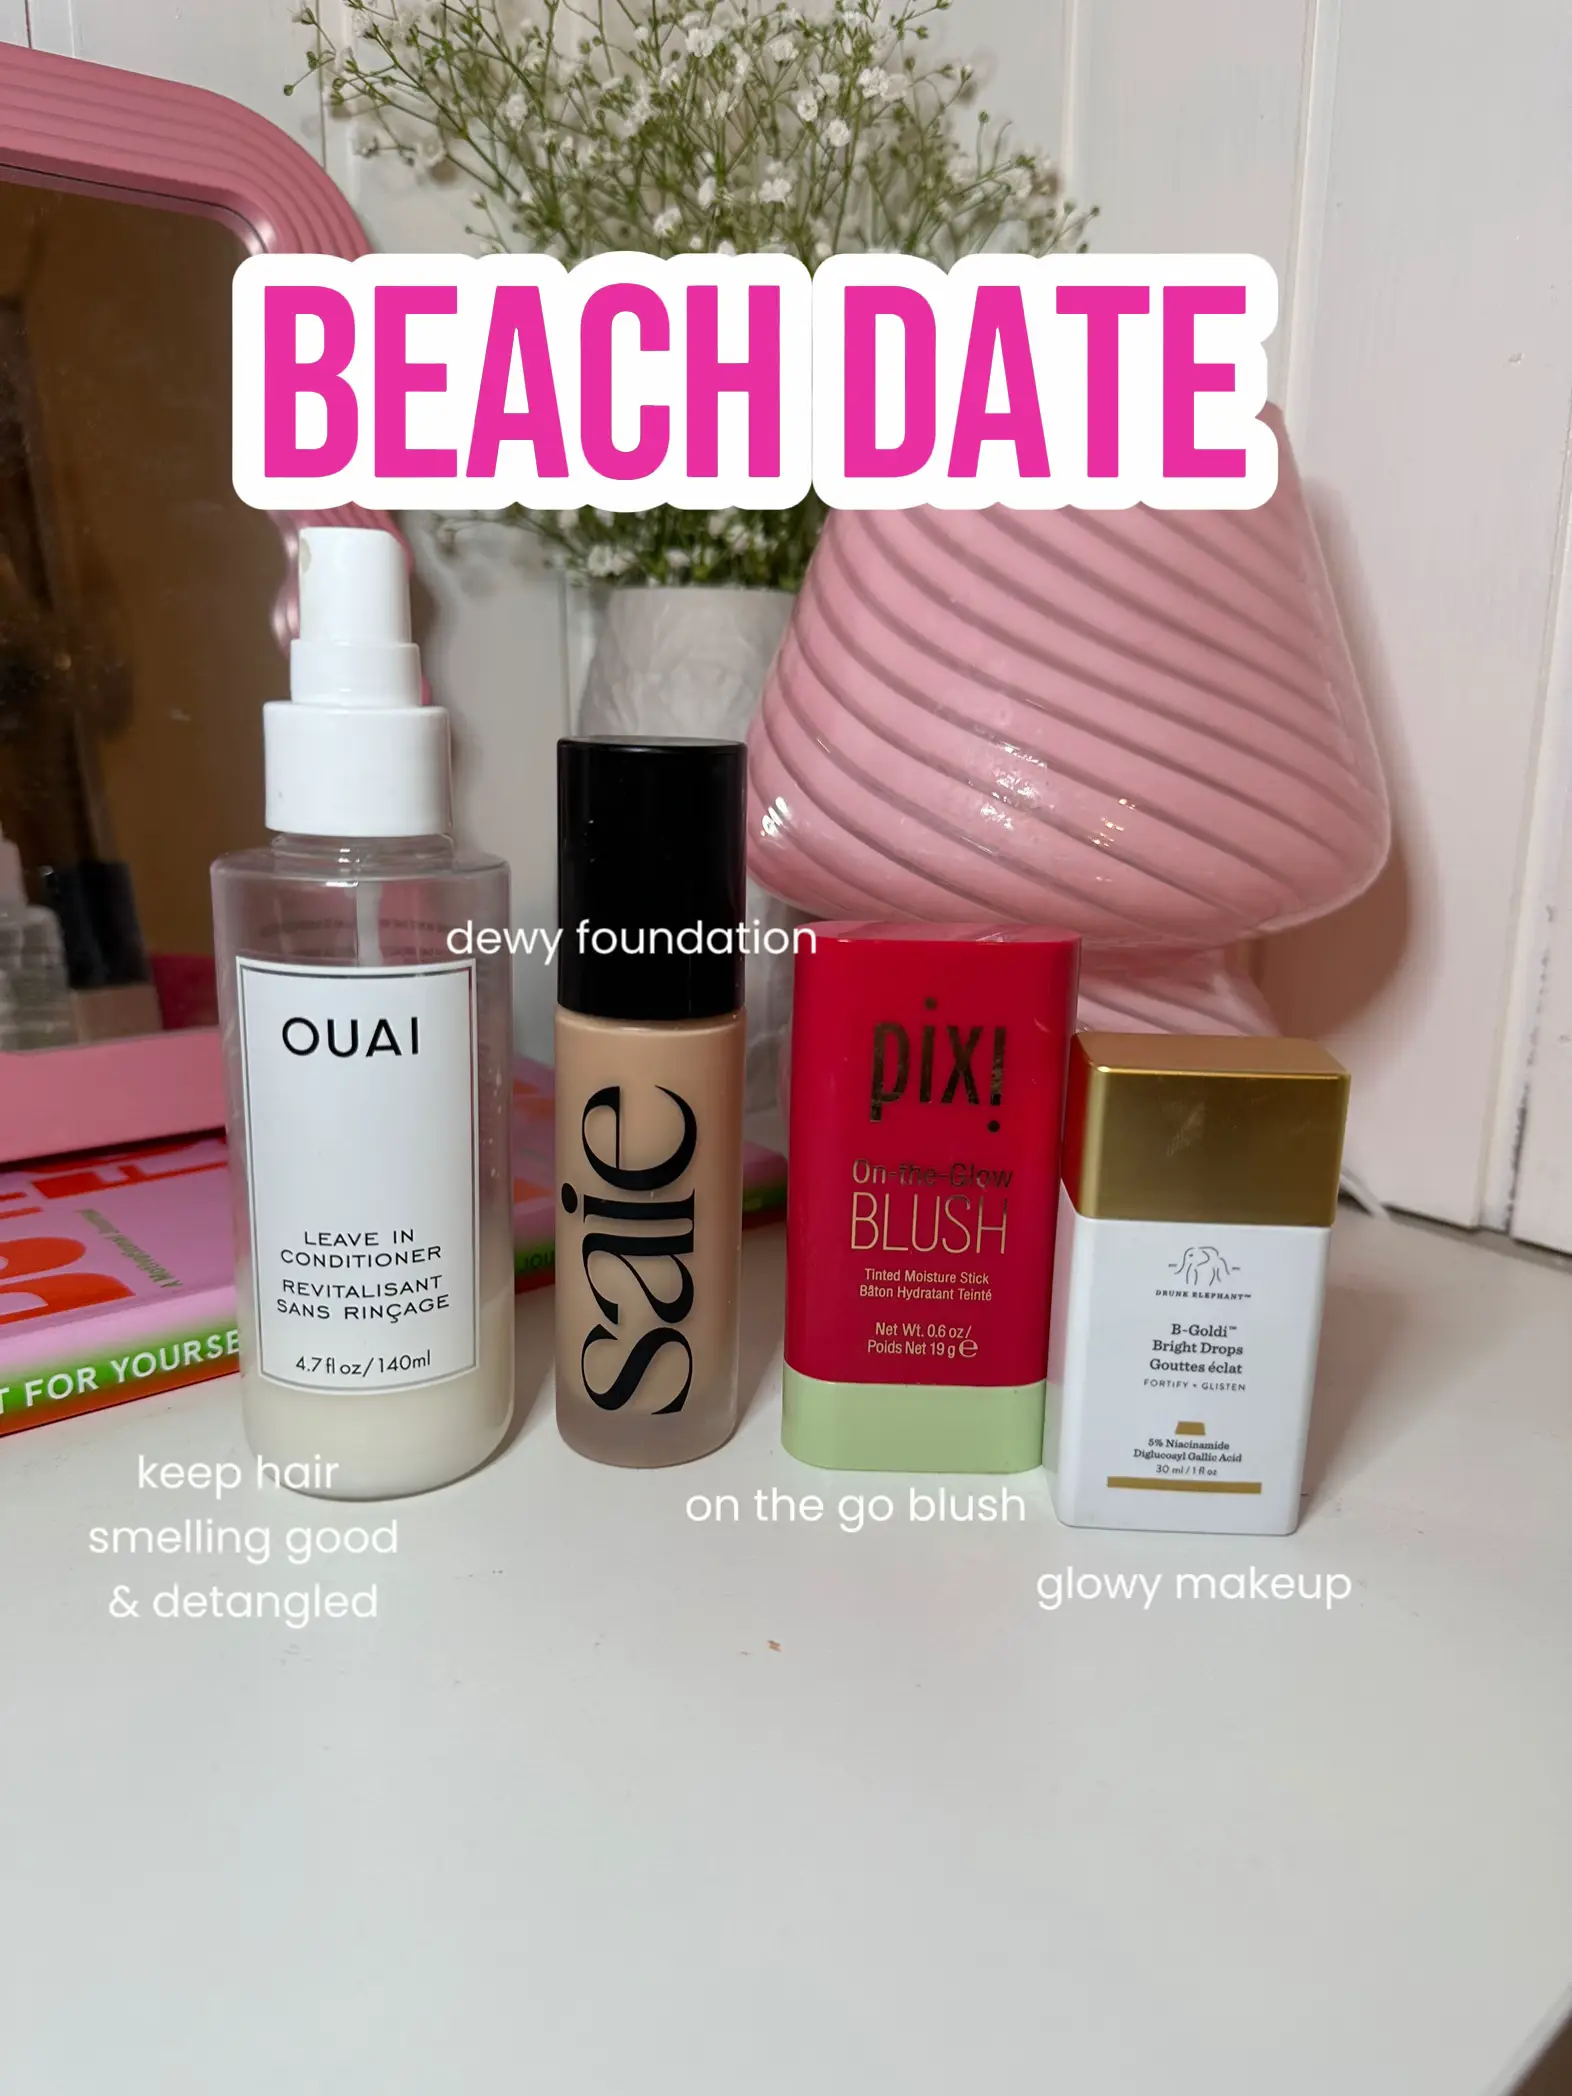  A beach date with dewy foundation, keep hair on the go, and blush smelling good.